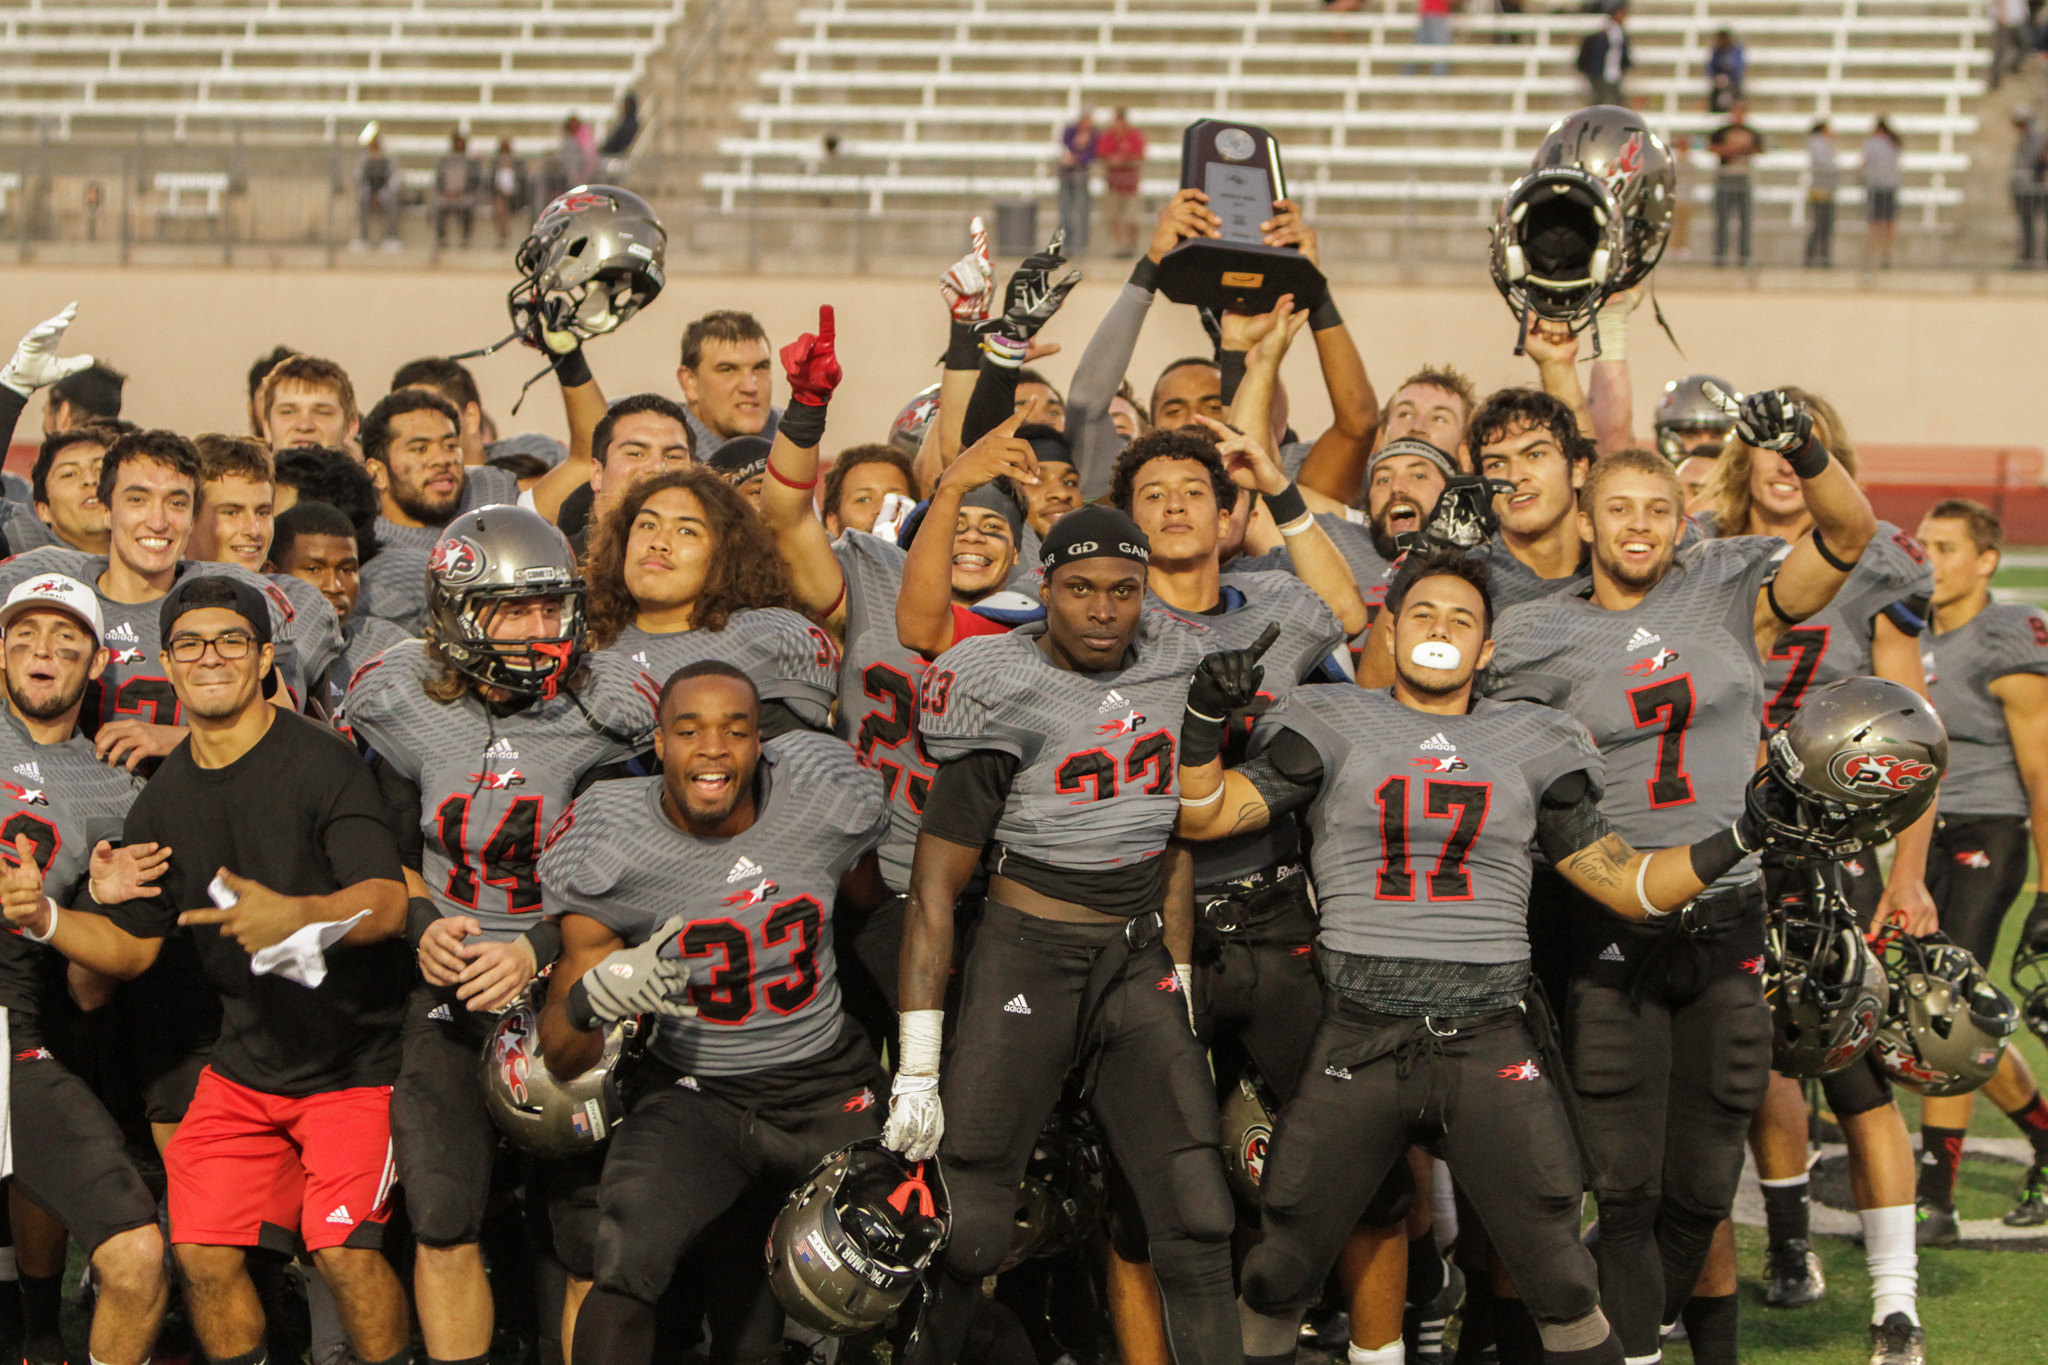 Nov. 22, 2014. Palomar football team celebrates after winning the Patriotic Bowl against Glendale College. The Comets defeated the Vaqueros 30-22 and finish the season 7-4 . The game was held at Escondido High School in Escondido, Calif. (Philip Farry/The Telescope)